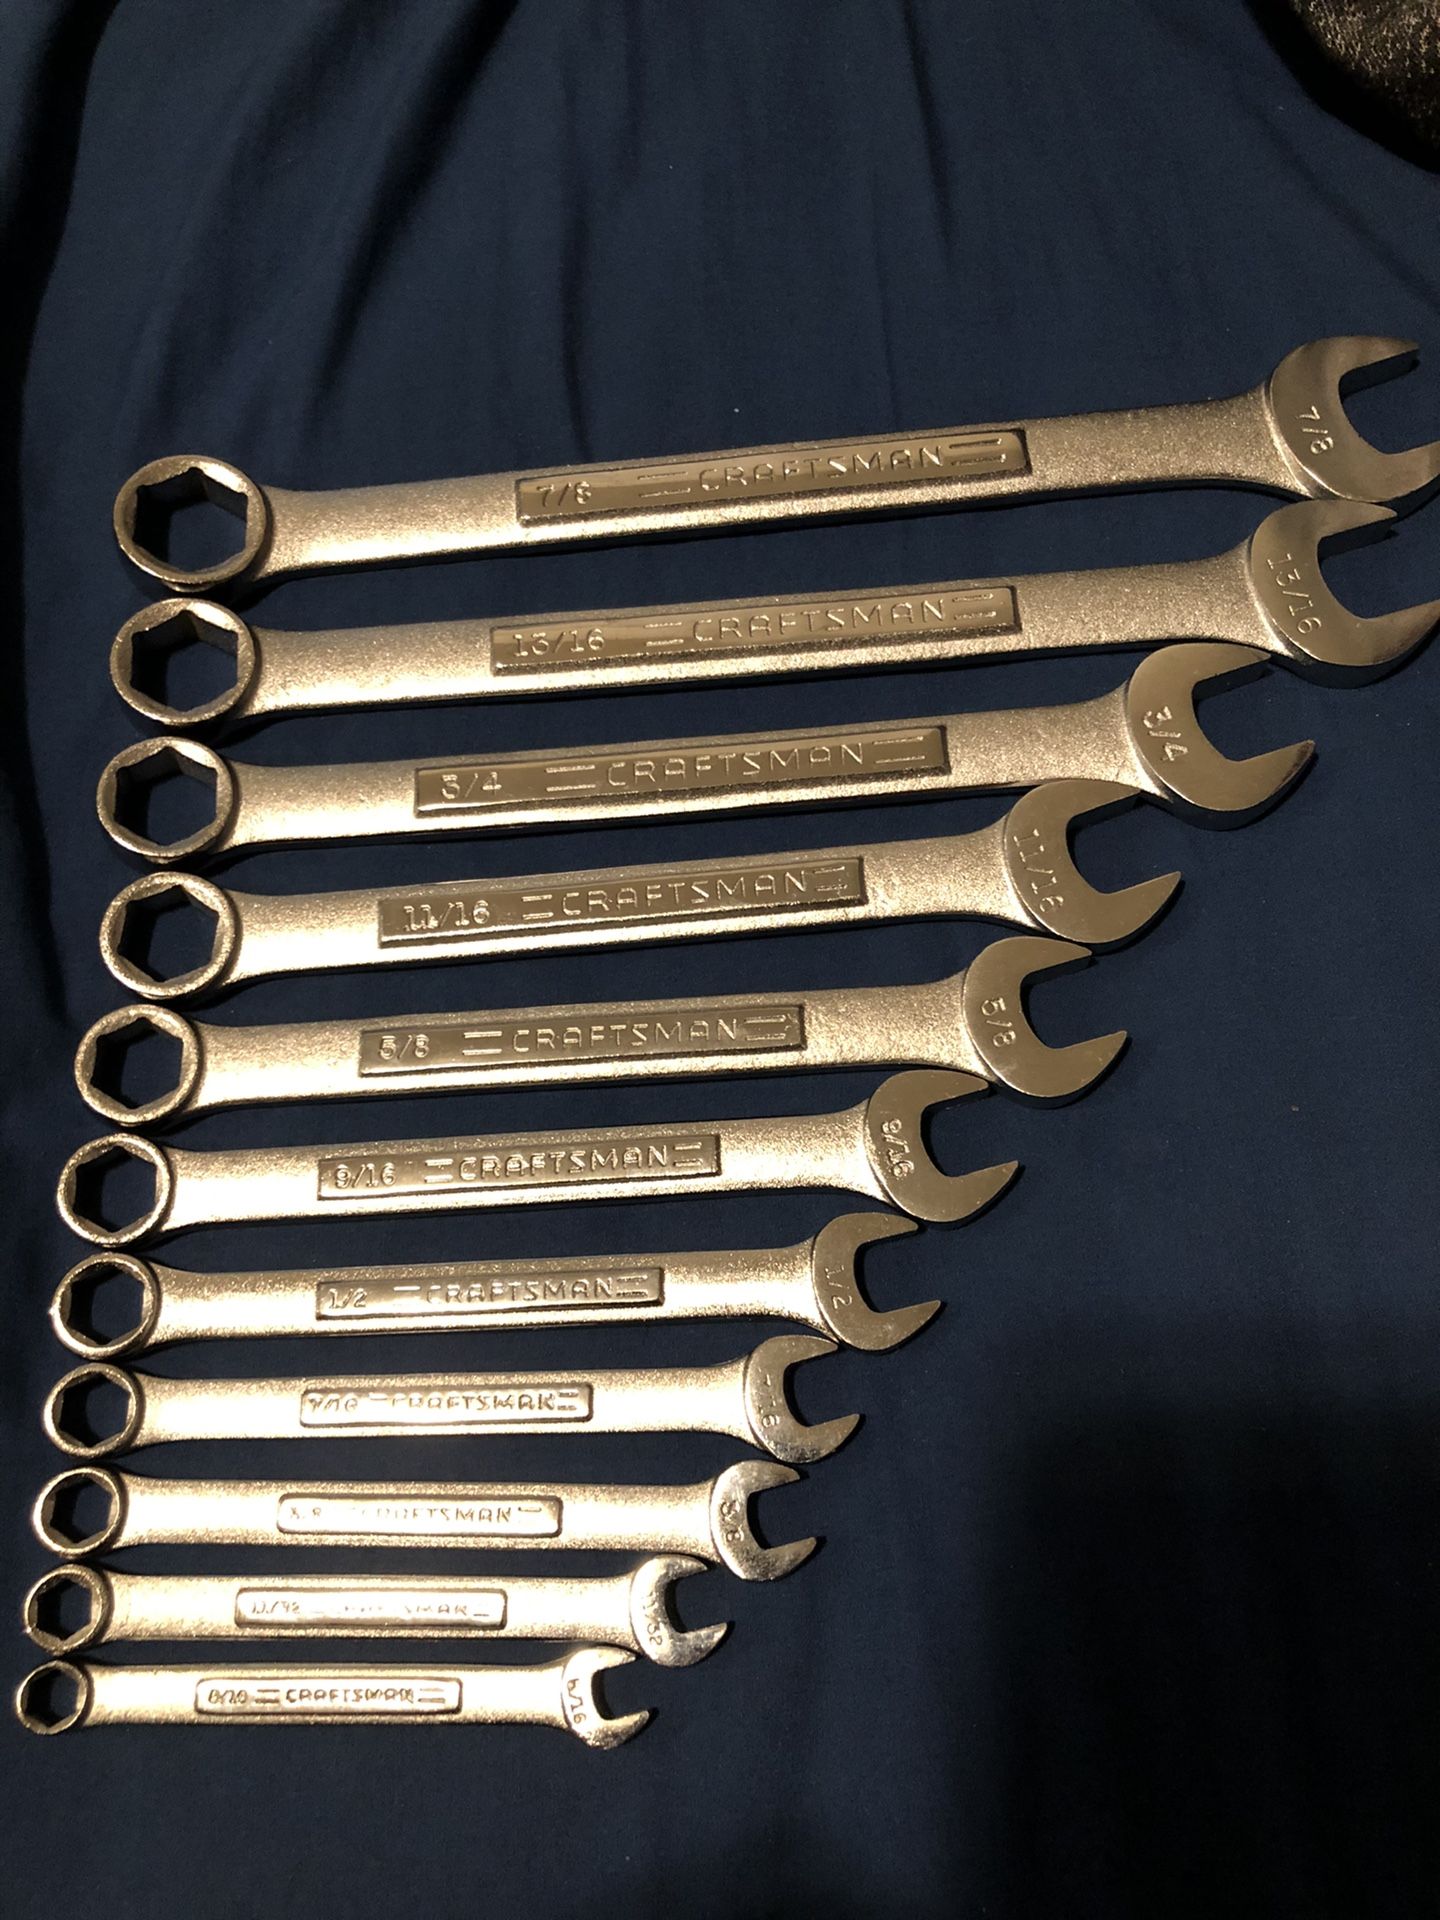 Craftsman wrenches SAE